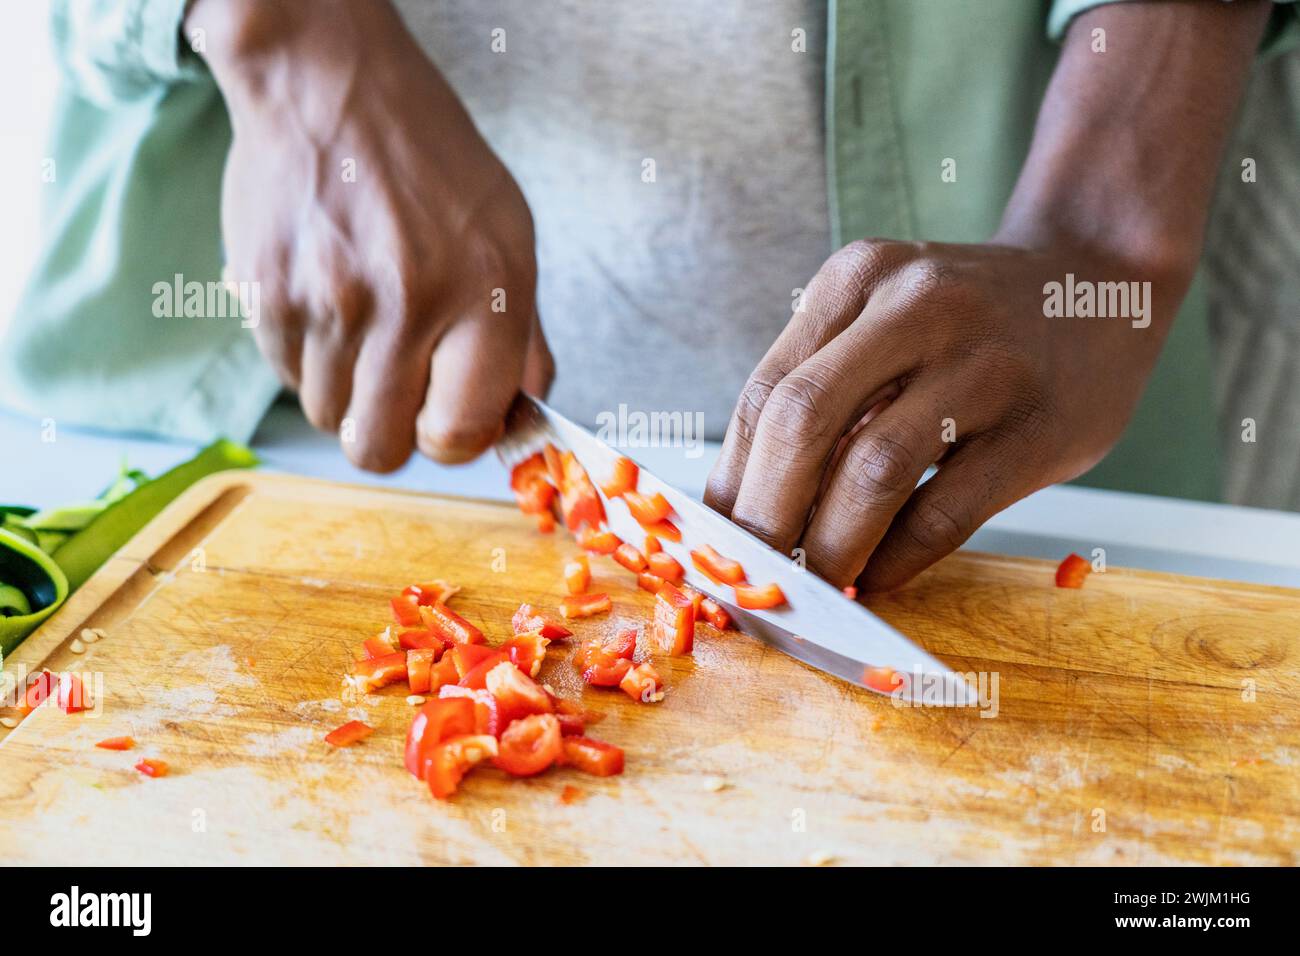 Close up of man's hands cutting vegetable with sharp knife on cutting board Stock Photo